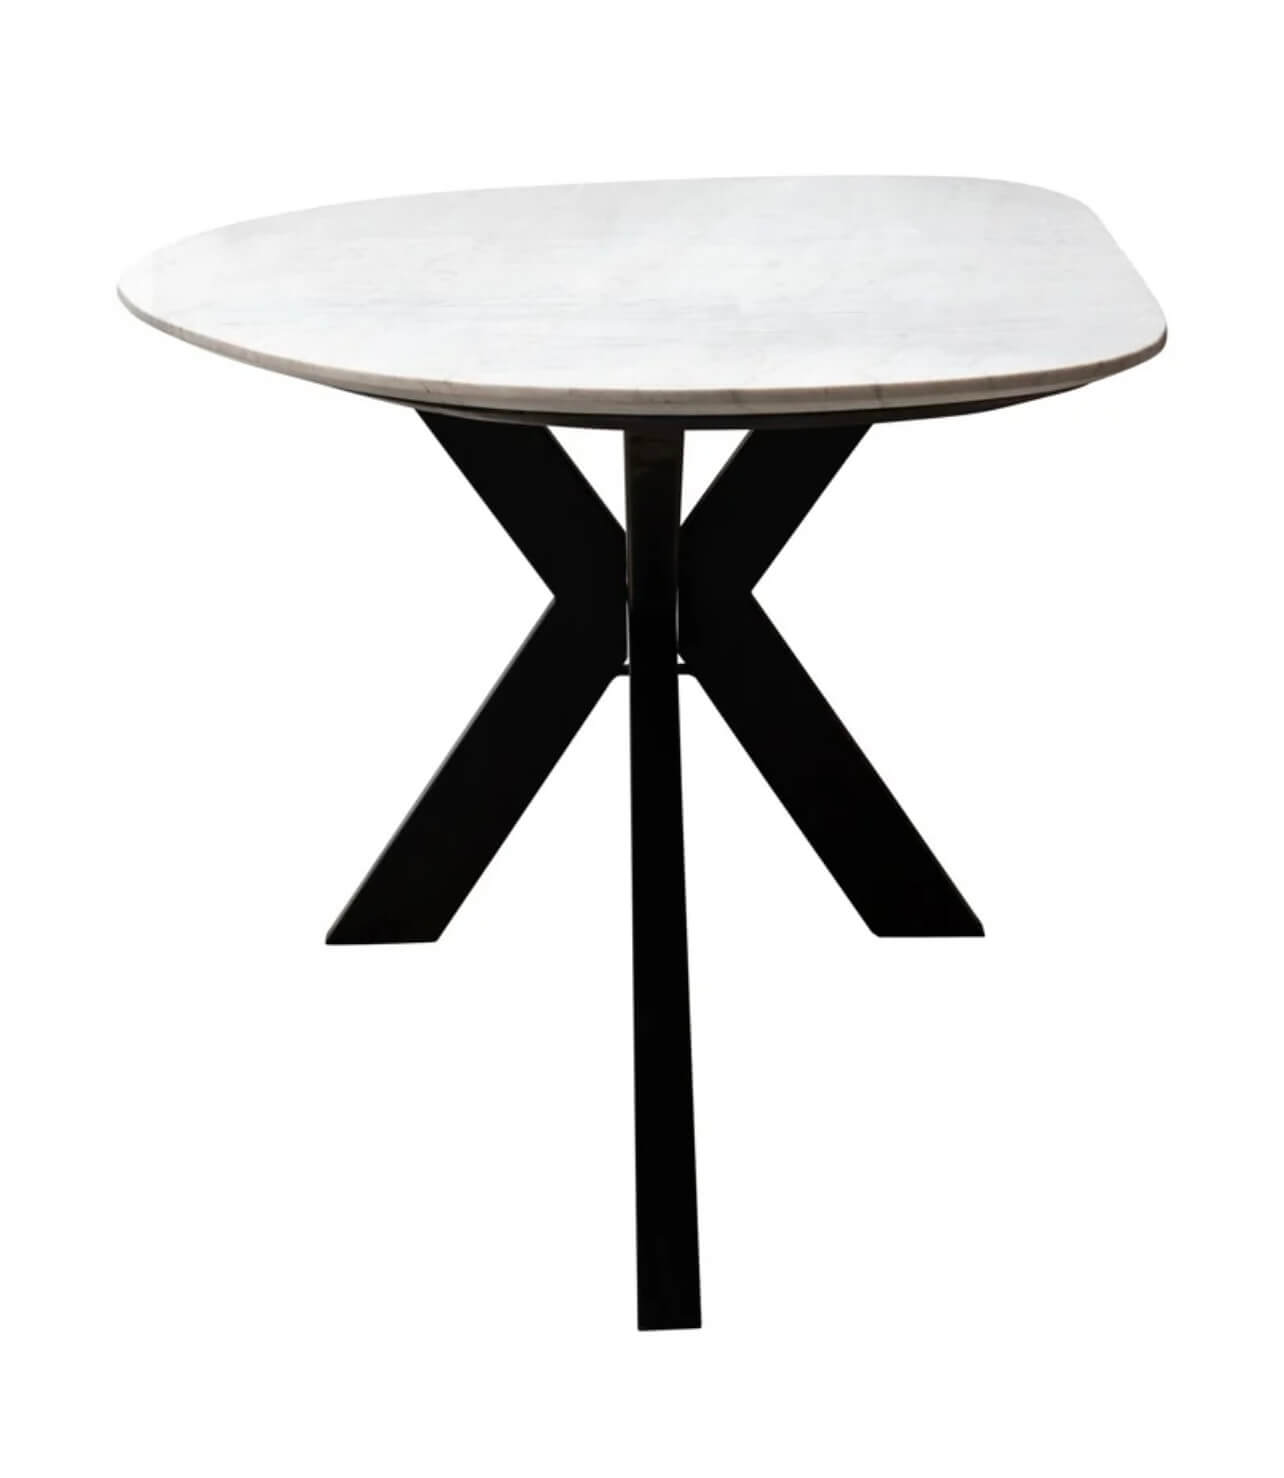 Trocadero Dining Table in White Marble